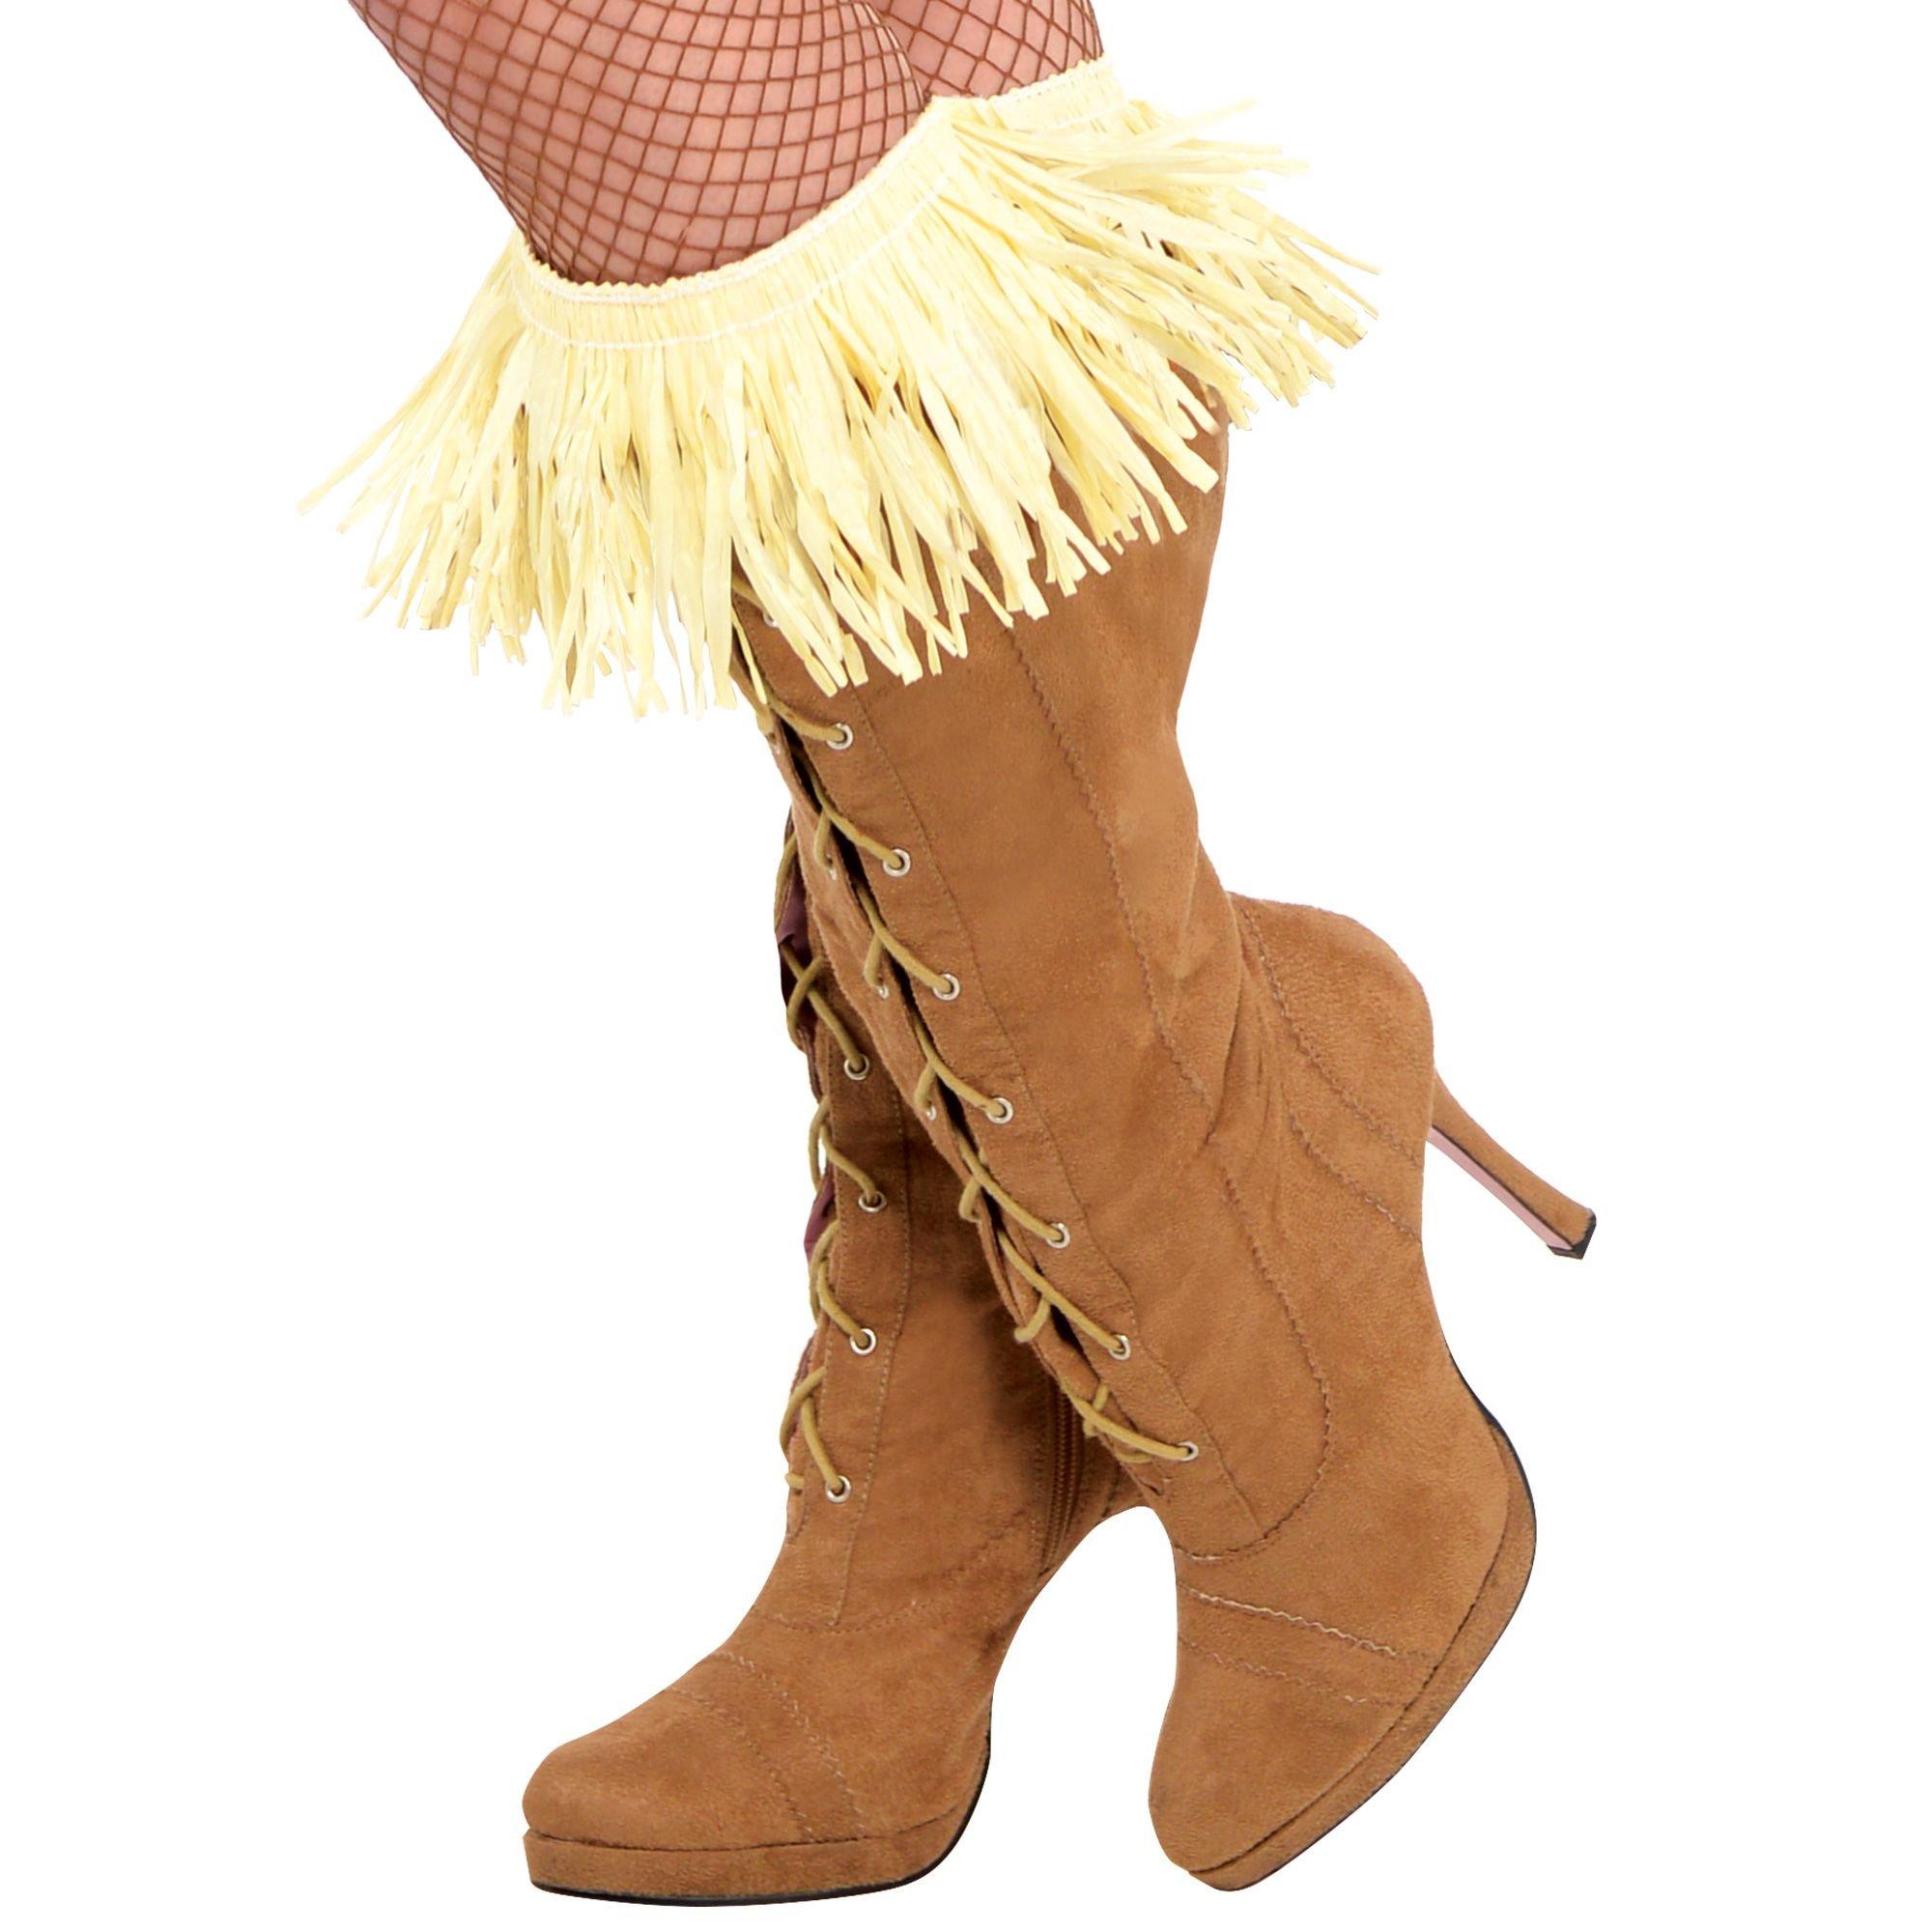 Adult Scarecrow Costume The Wizard Of Oz Party City